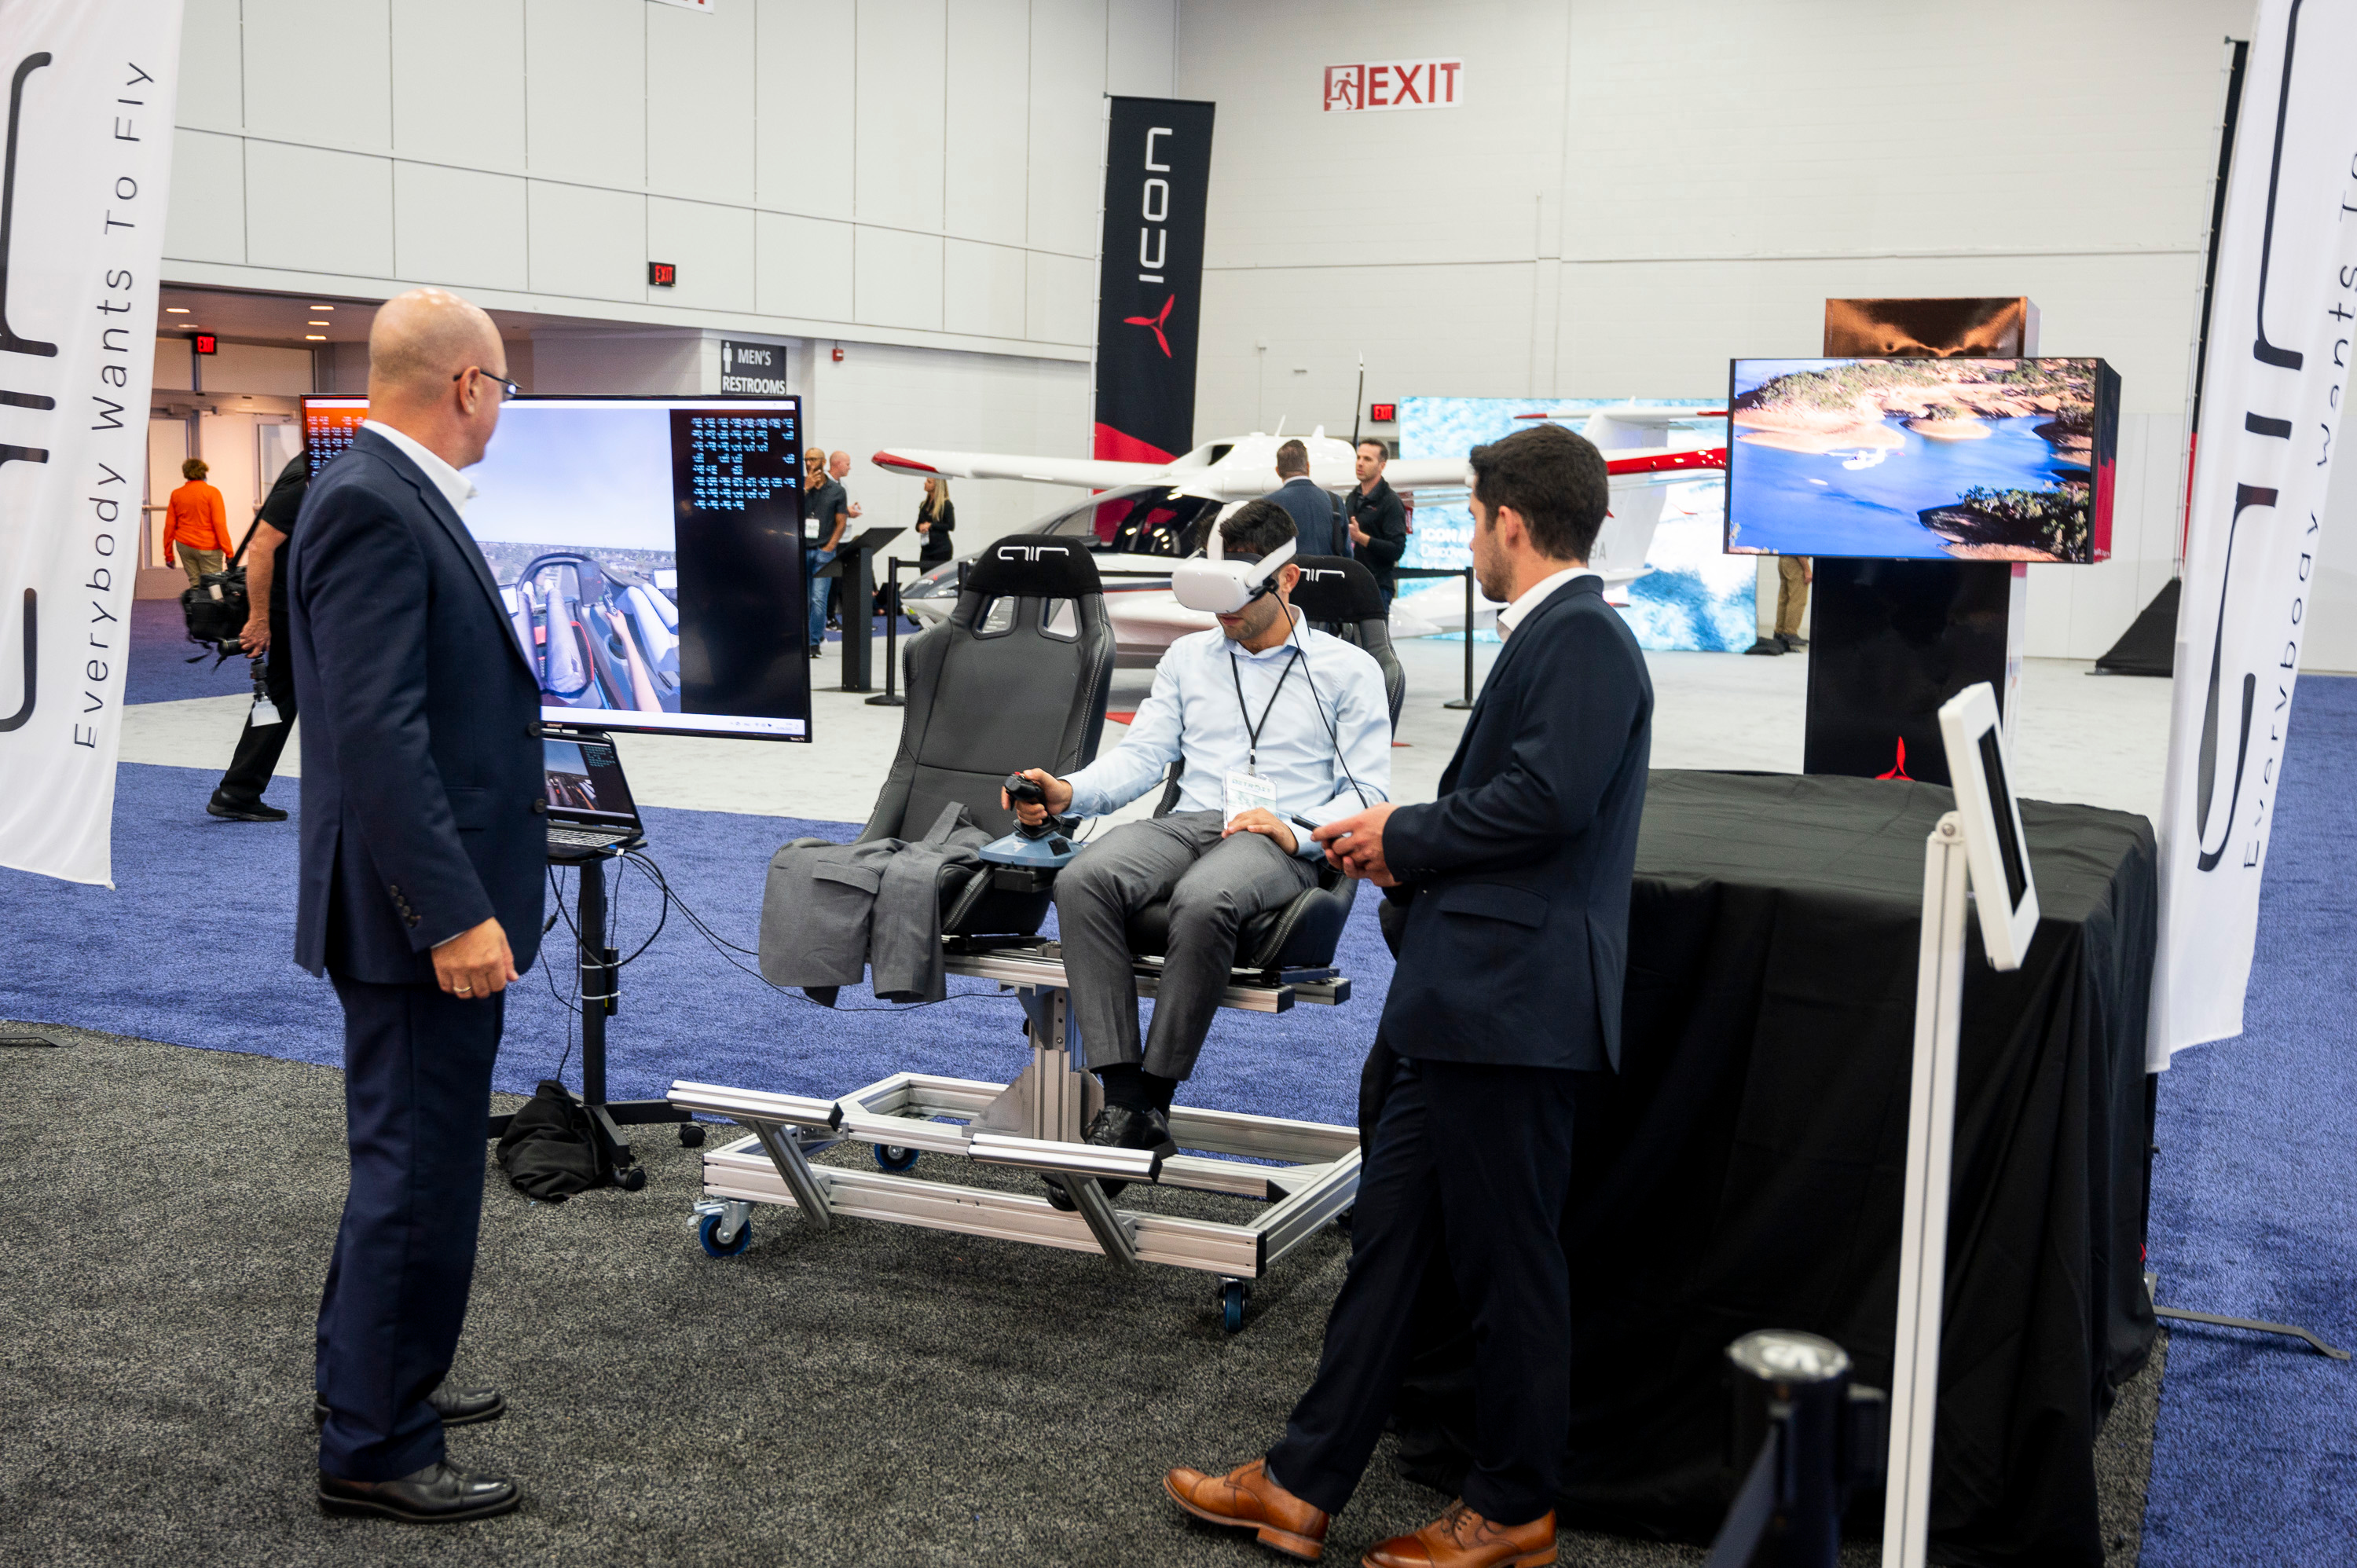 Guests experience a VR “flight” in the AIR booth during the 2022 North American International Auto Show at Huntington Place in Detroit on Wednesday, Sept. 14 2022.